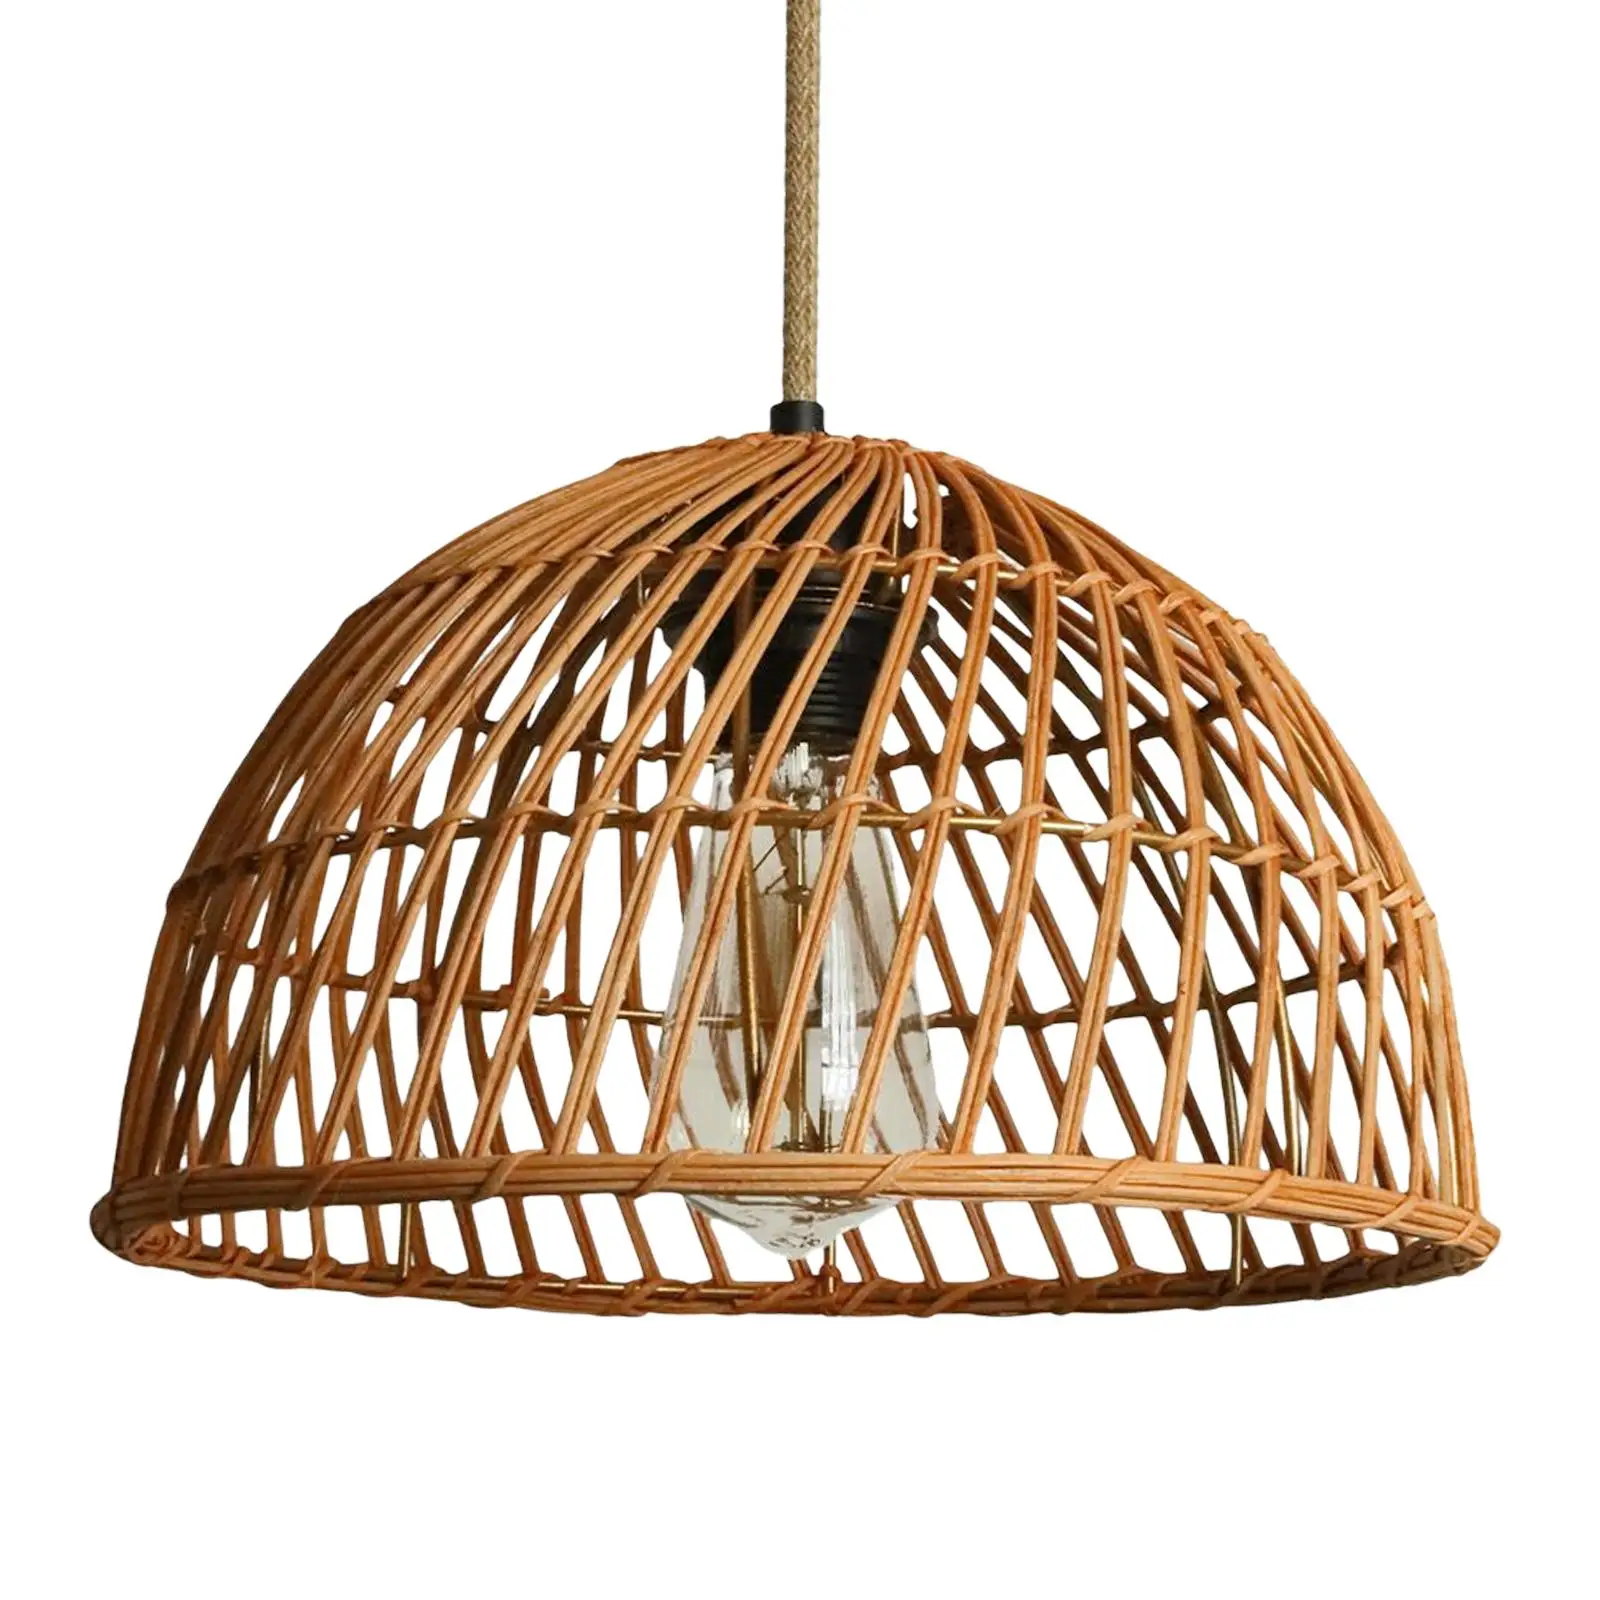 Japanese Style Rattan Pendant Lamp Shade Rustic Weave Ceiling Fixture Shade Dome Hanging Ceiling Lampshade for Bar Hotel Cafe